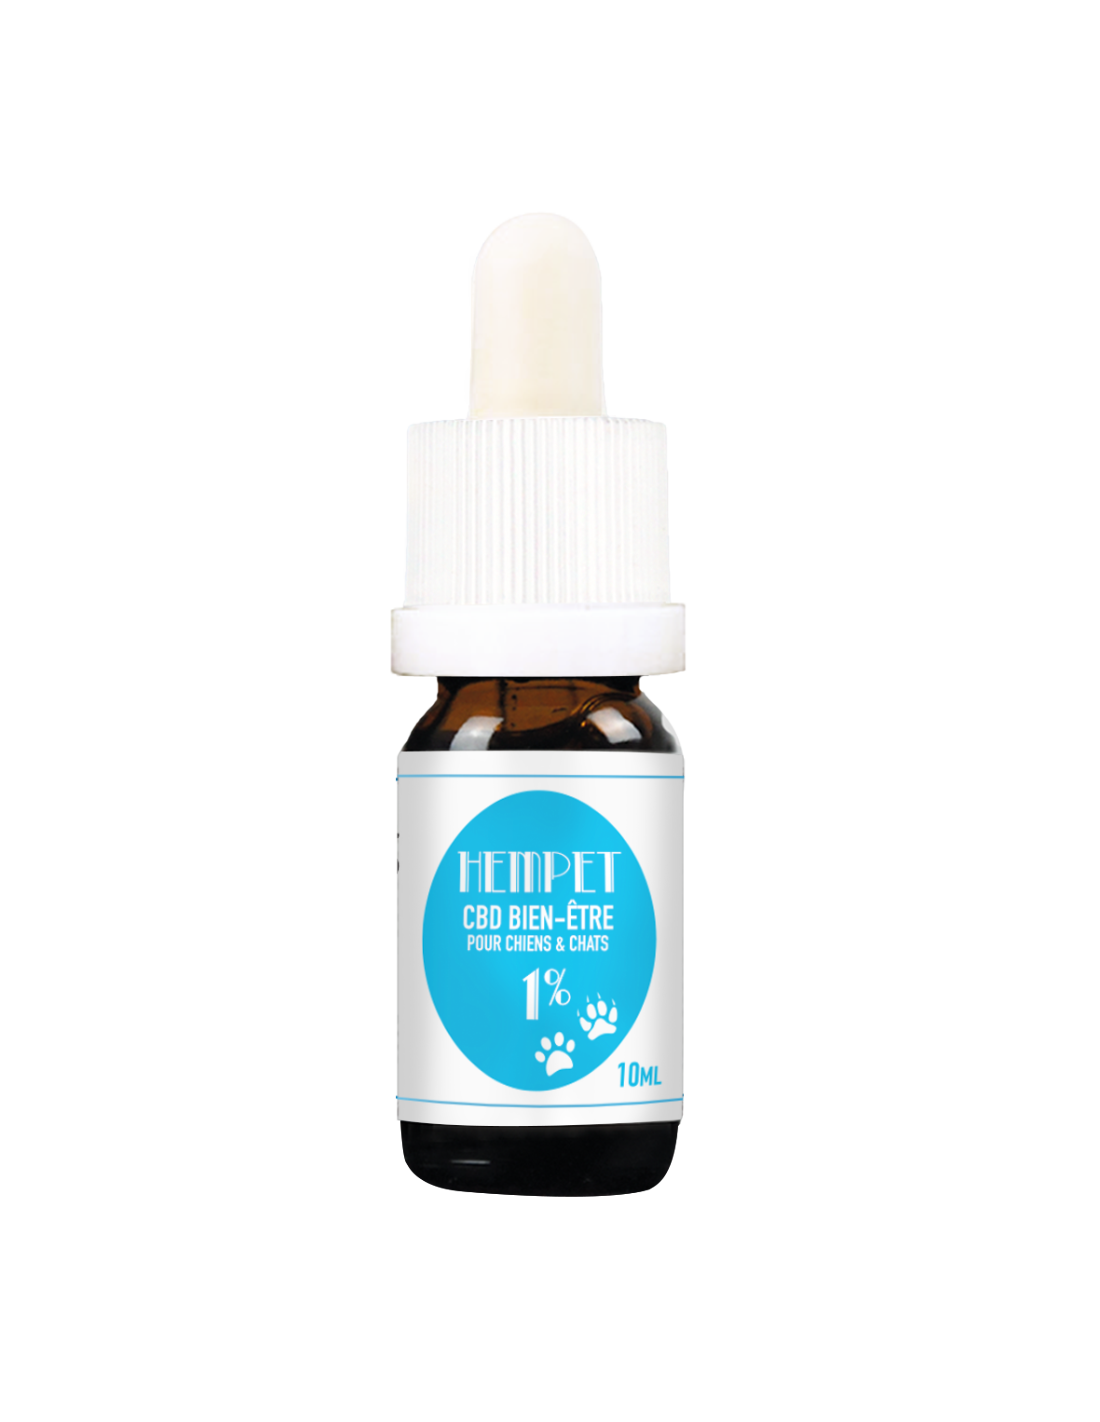 Huile alimentaire animaux - Fish Oil - 10ml